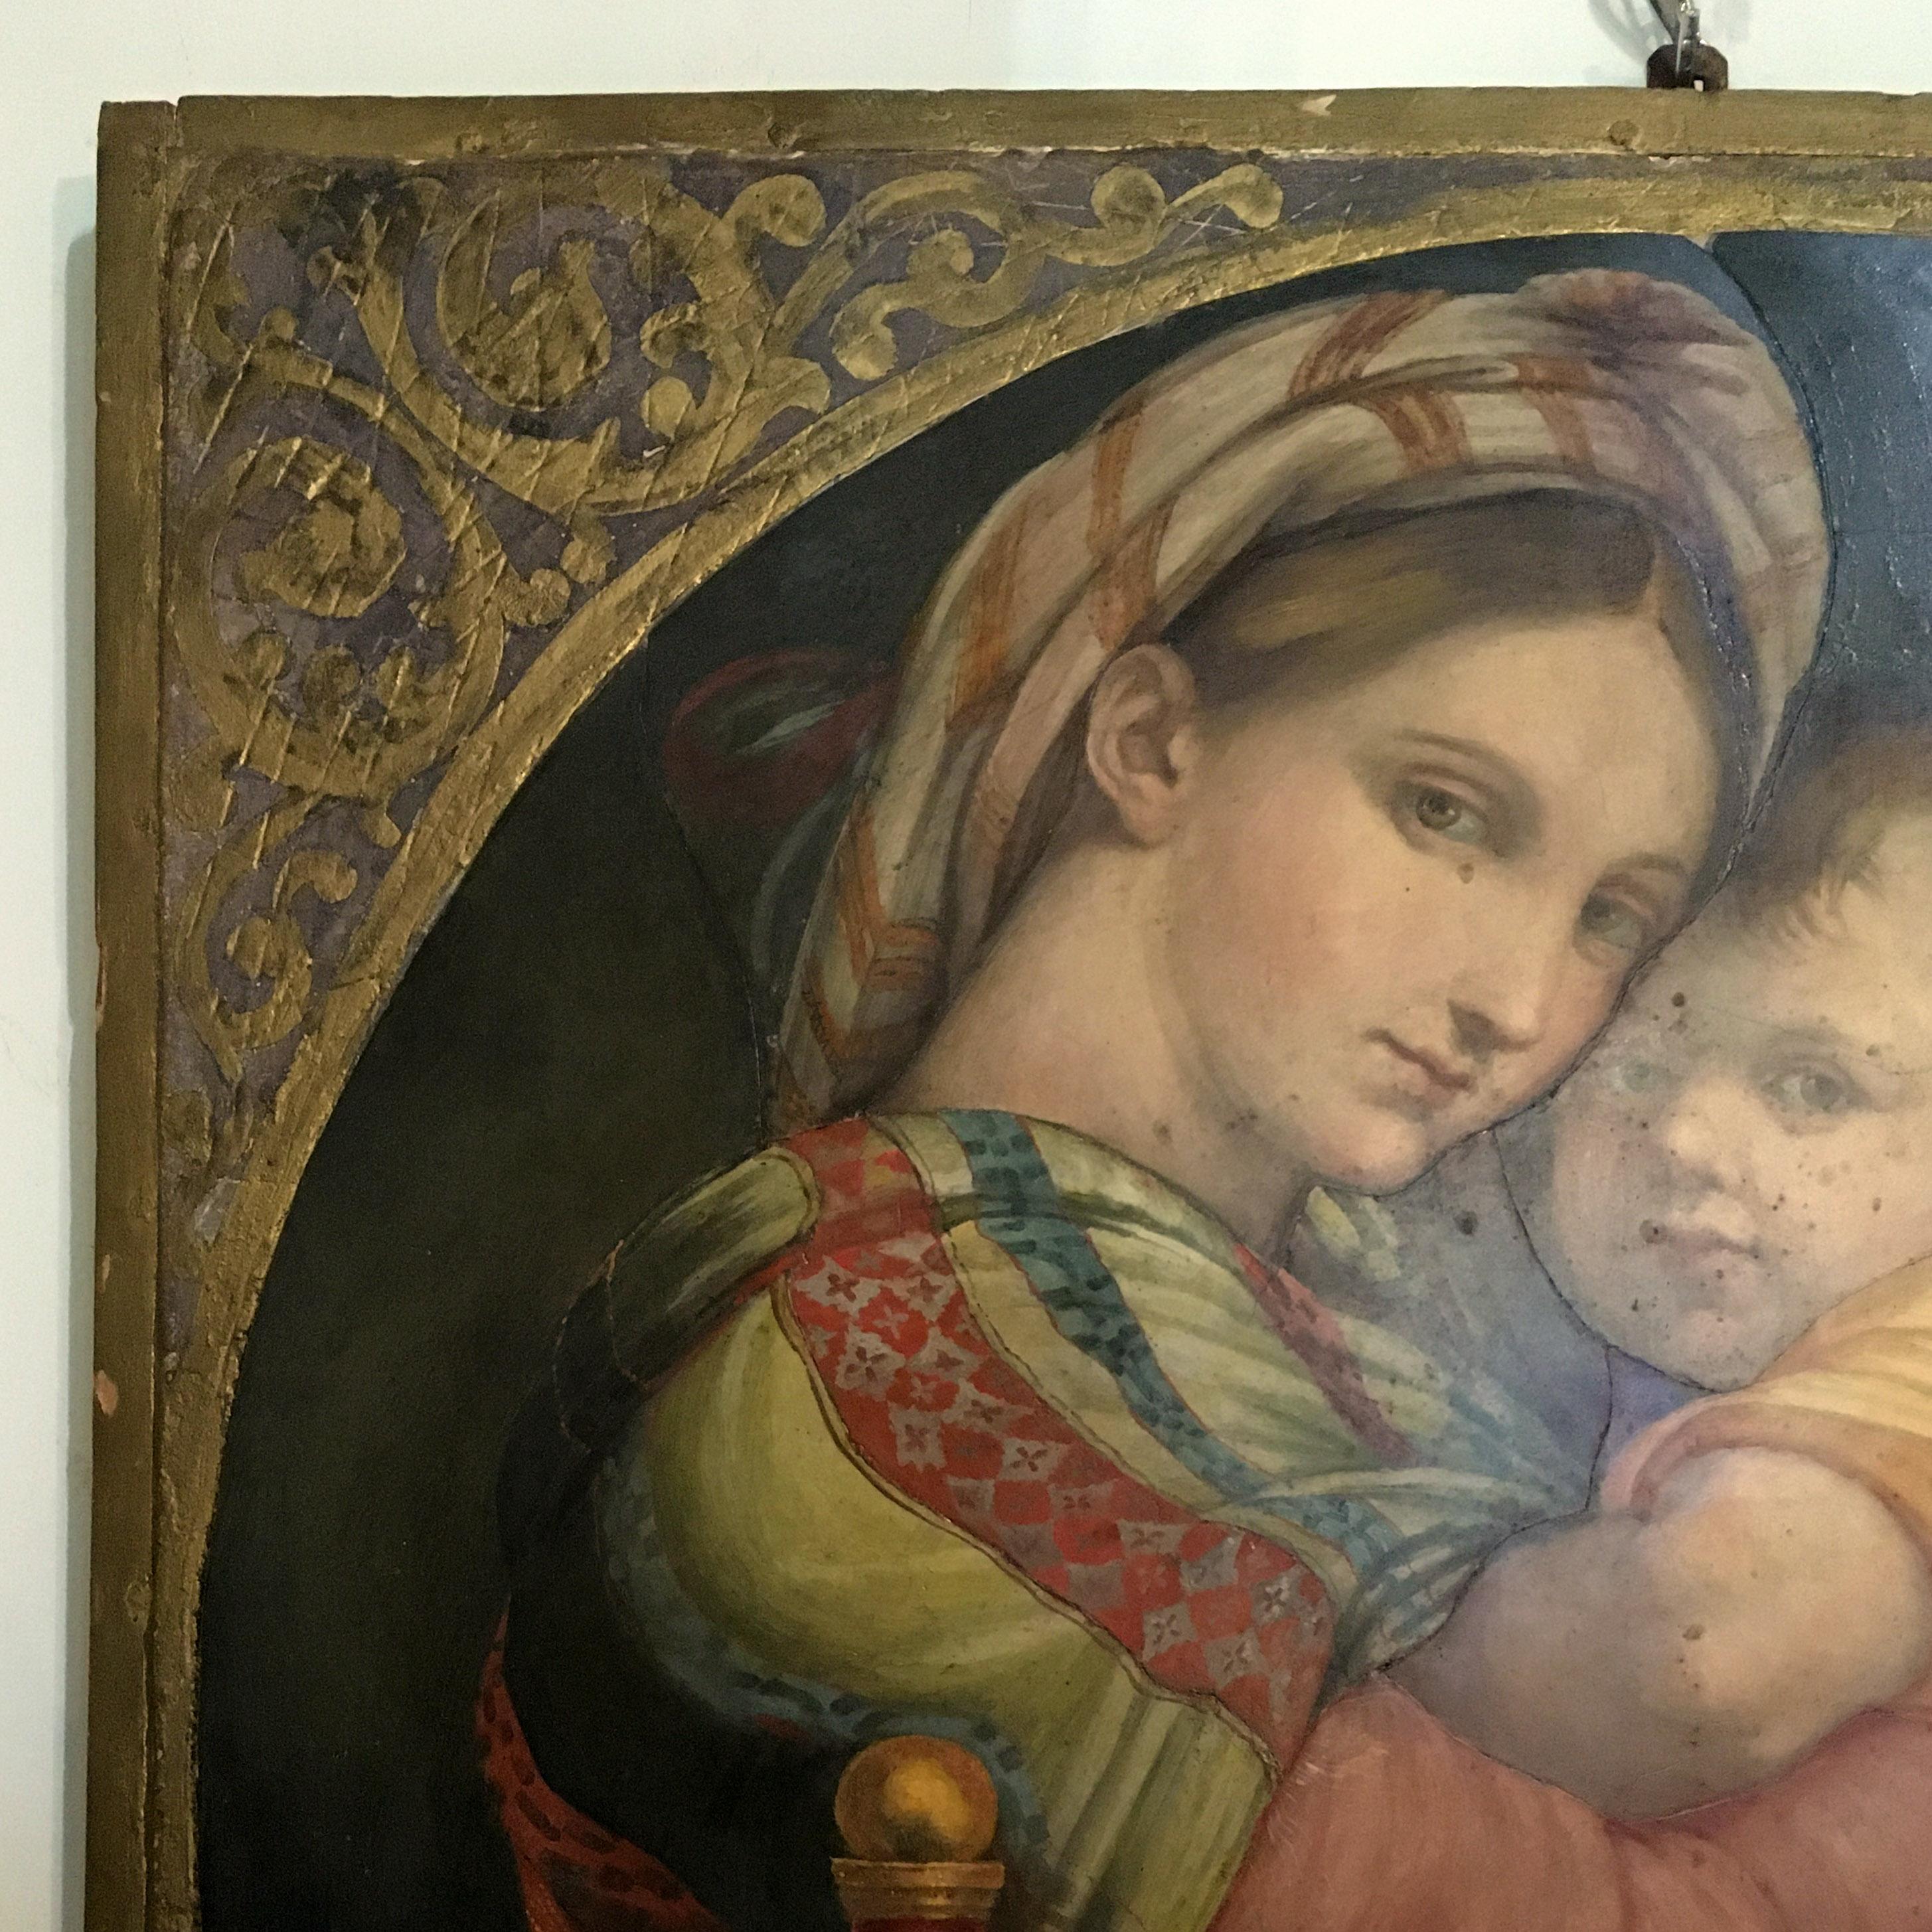 This beautiful oil on wooden panel painting depicts a Madonna with bambino and Saint John the Baptist.
The painting is actually a copy of a famous painting by the Italian Renaissance artist Raphael, the 